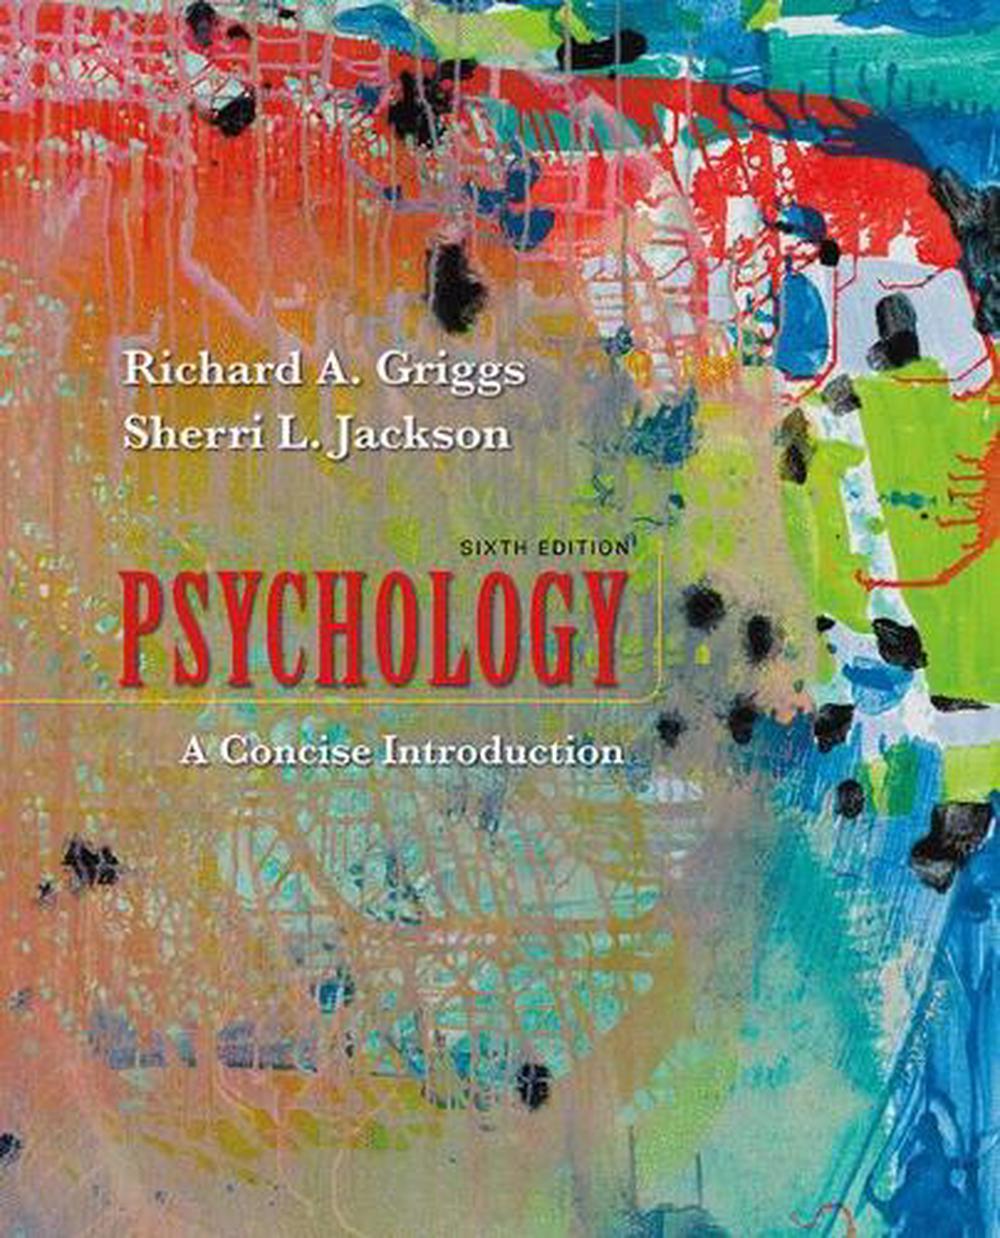 Psychology A Concise Introduction, 6th Edition by Richard